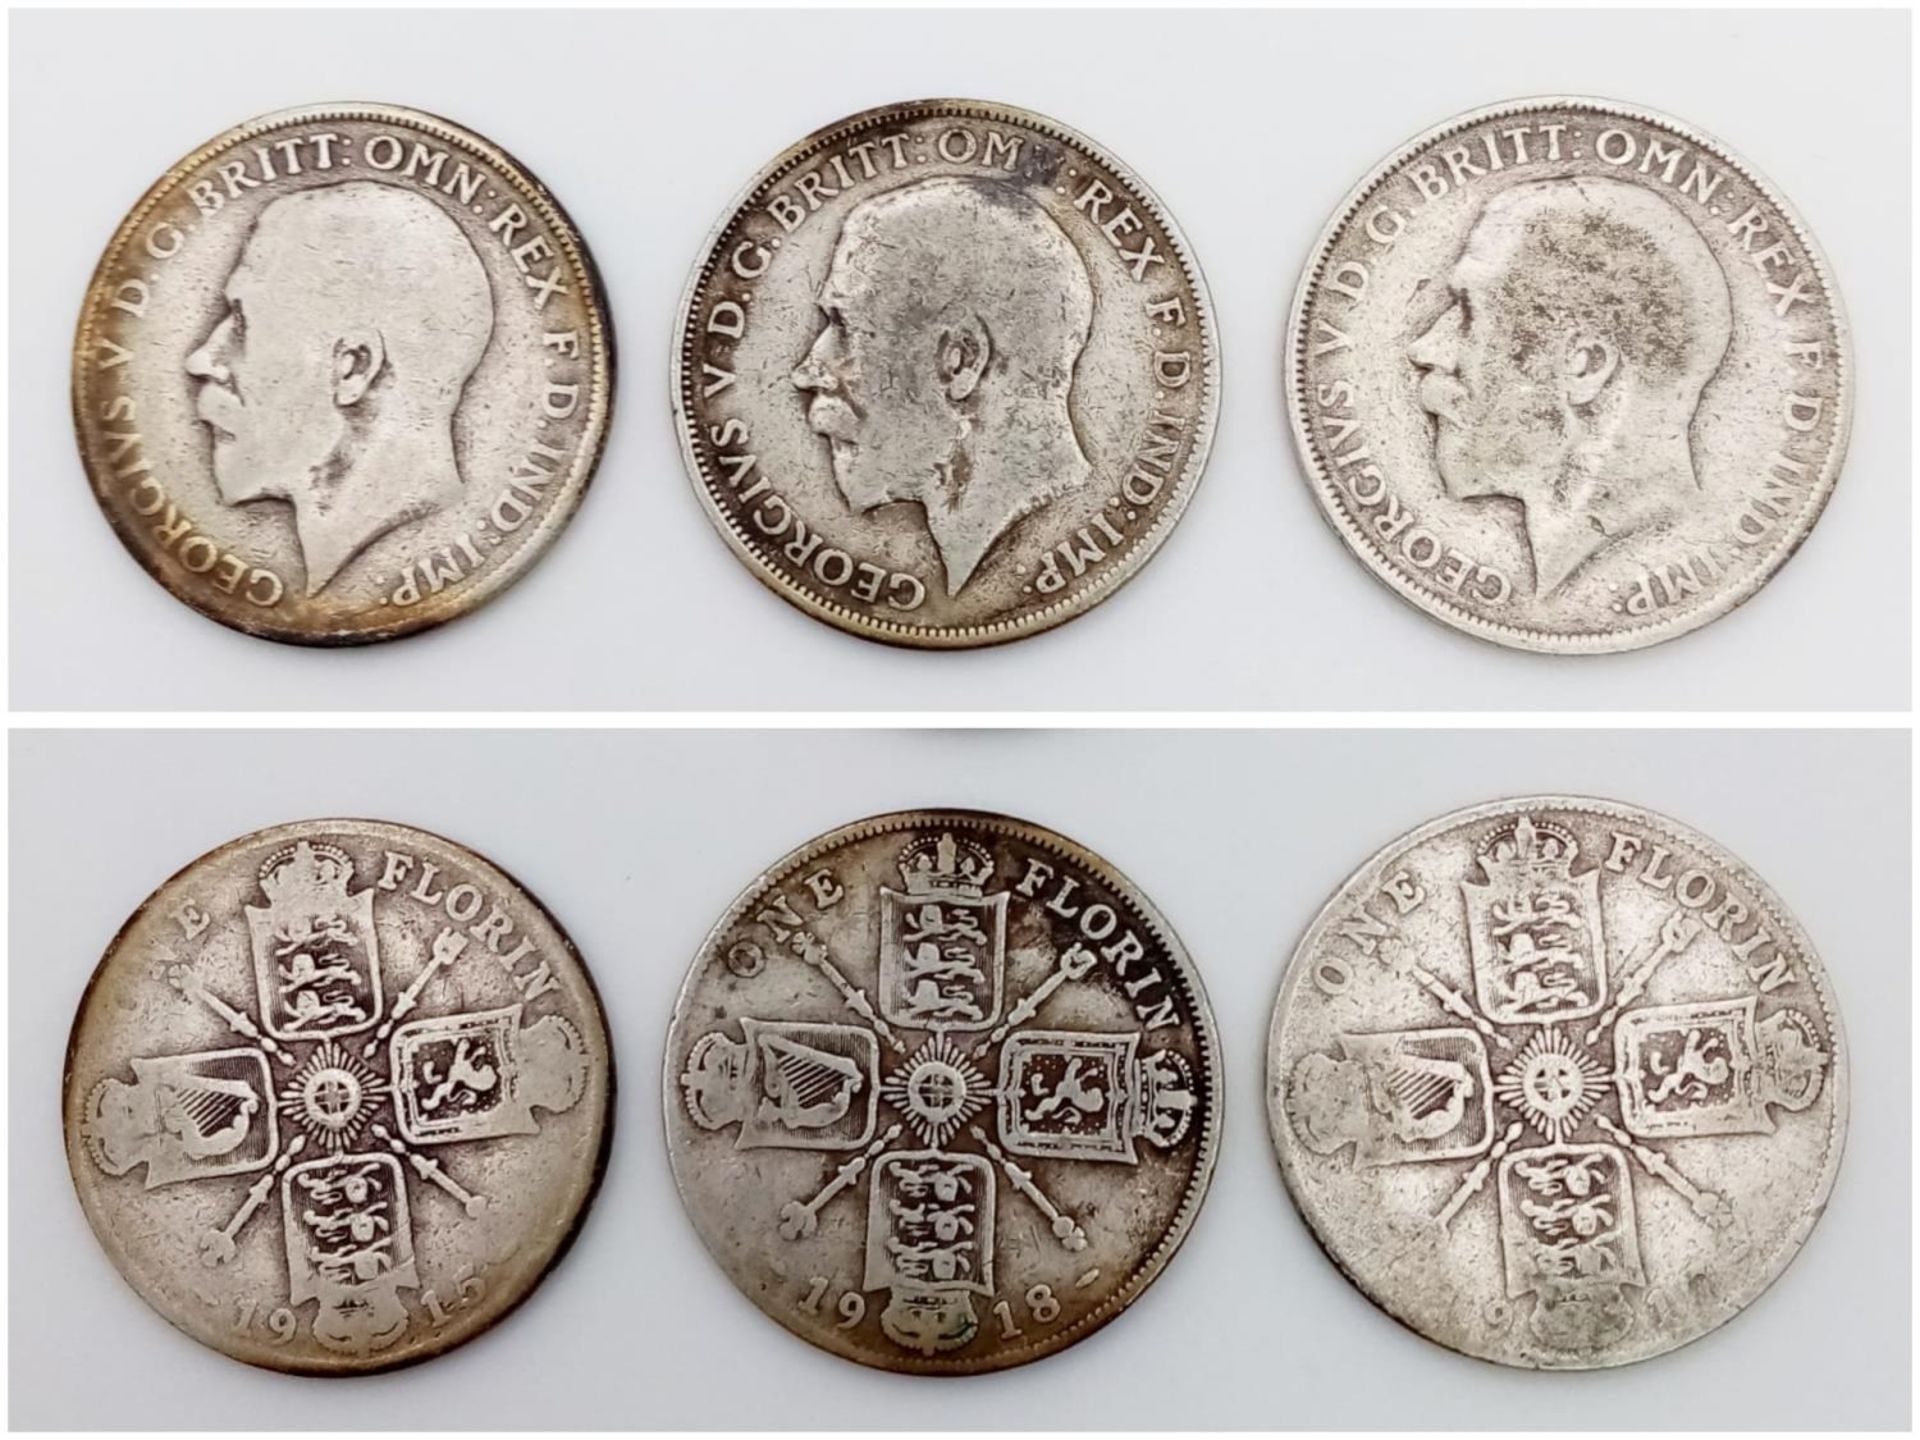 Three 1918 George V Silver Florin Coins. 1910,15 and 18. Please see photos for conditions.